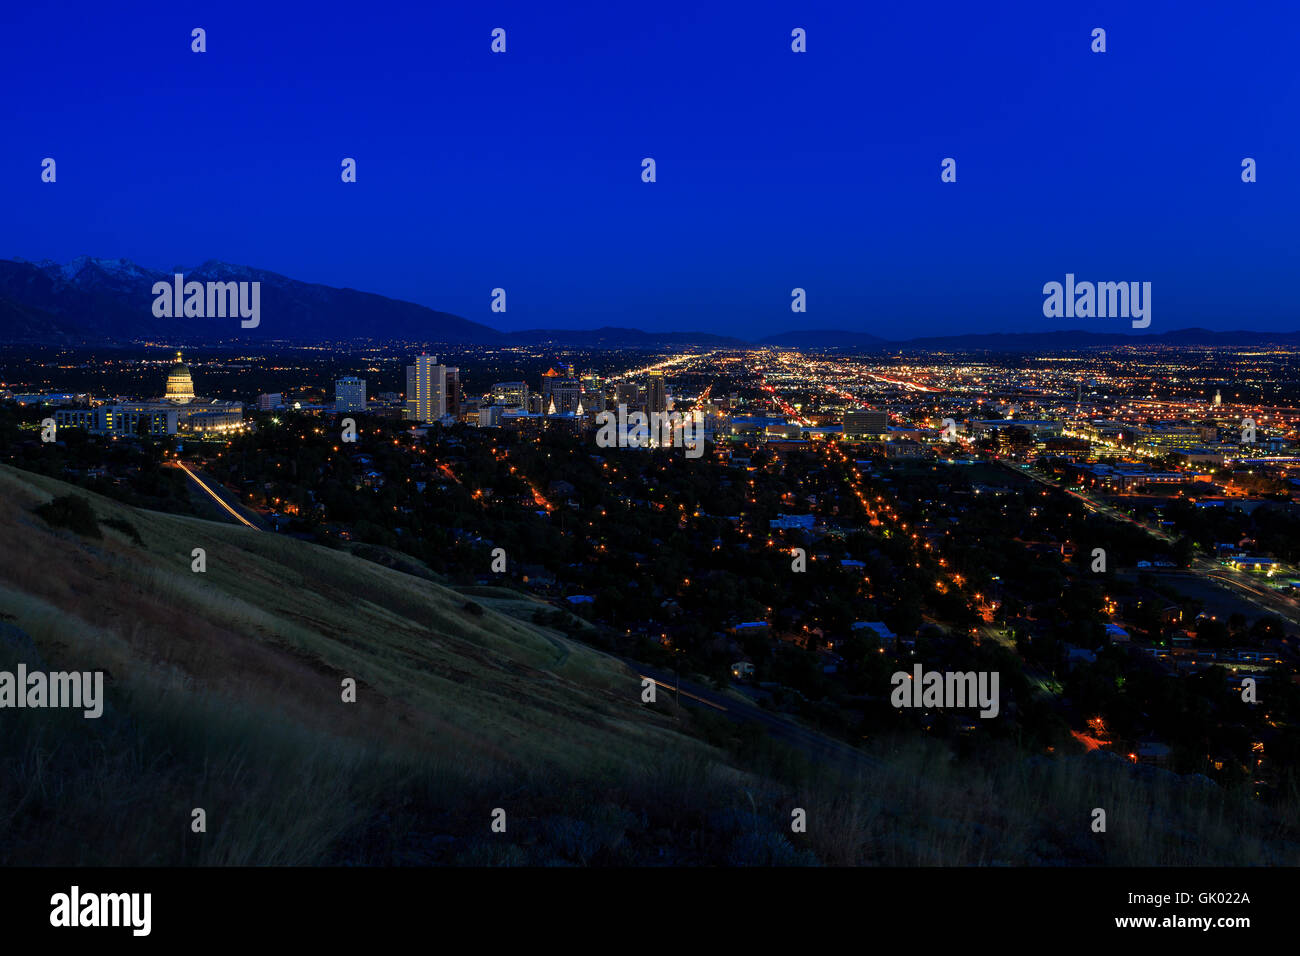 This is a evening view of the Salt Lake Valley and buildings of downtown Salt Lake City as the evening lights come on. Stock Photo